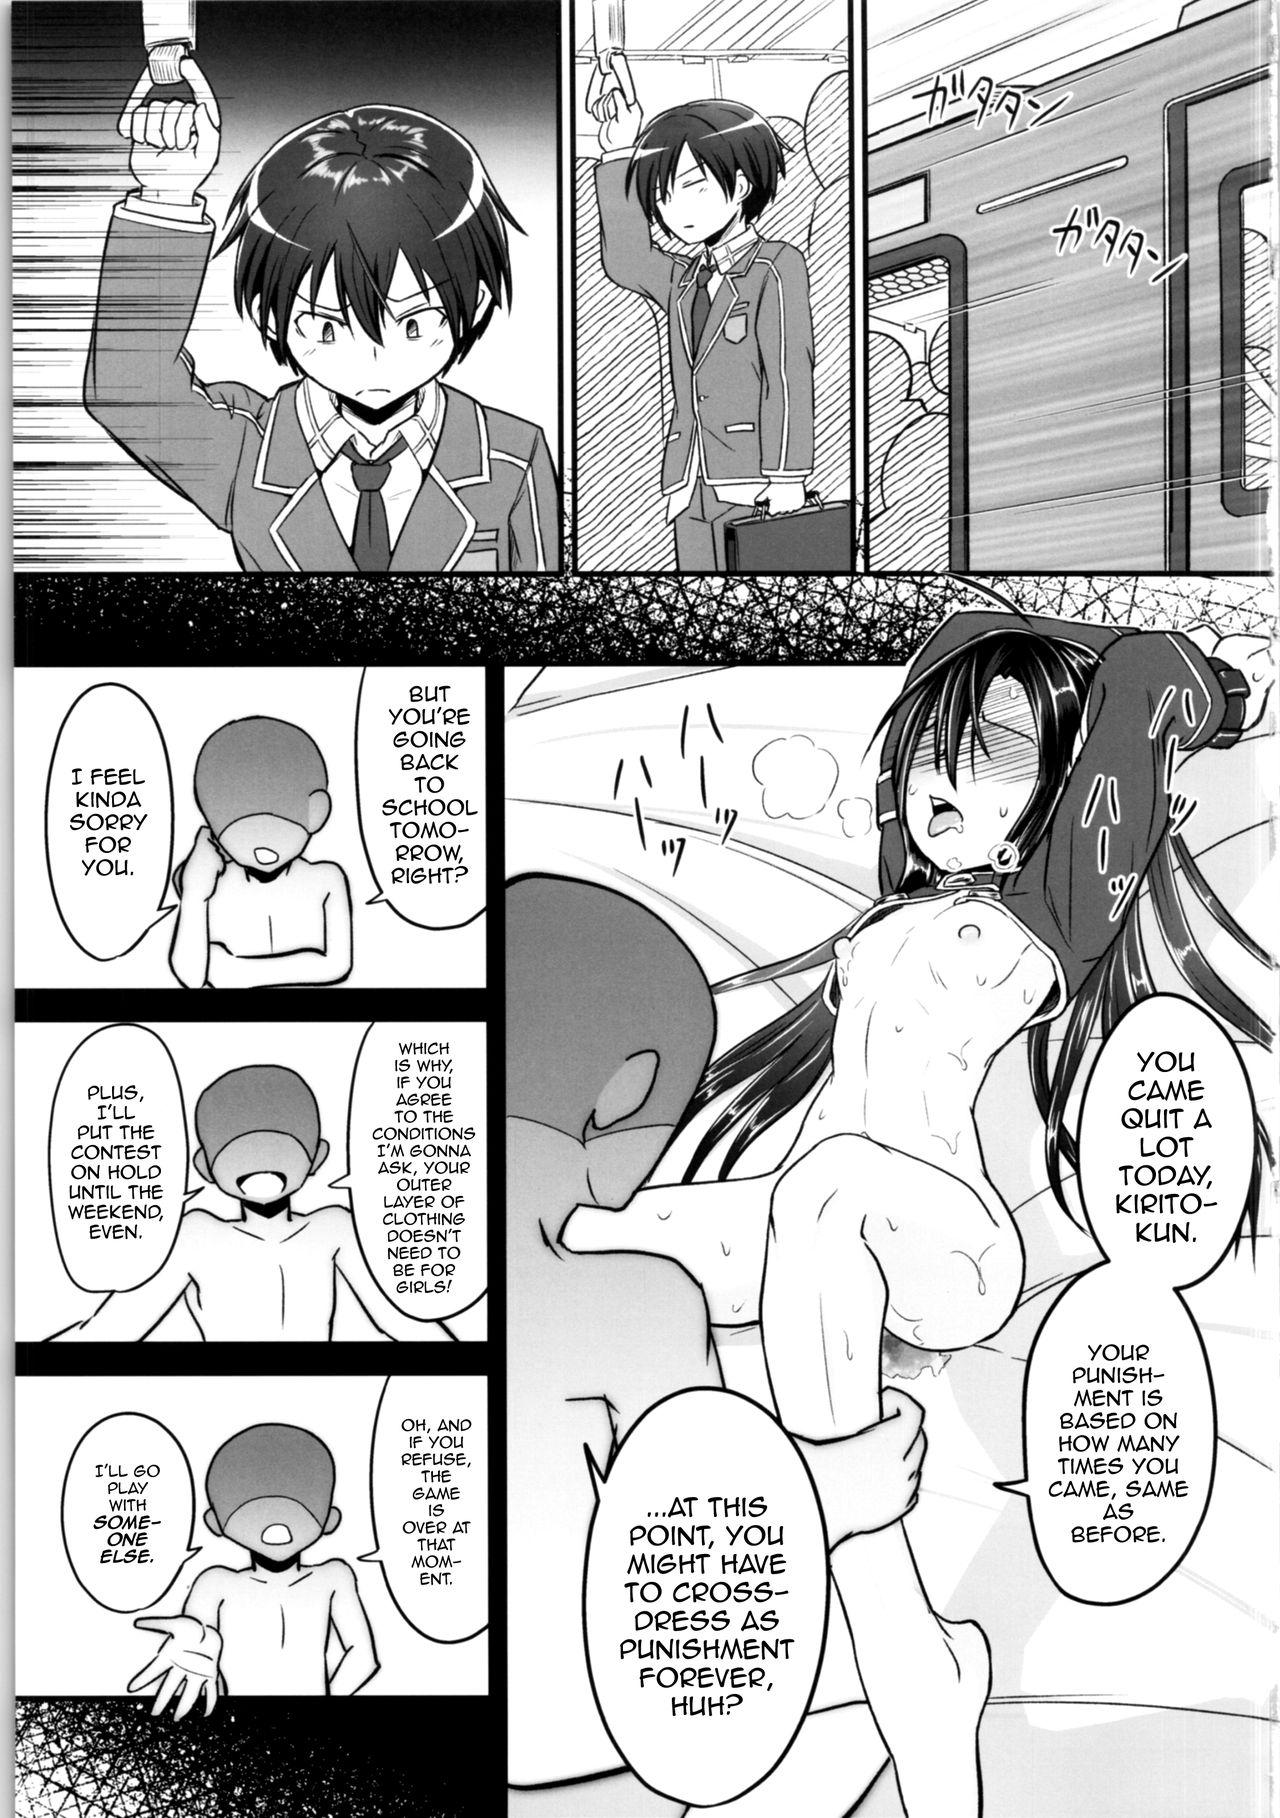 Gaypawn Kiriko Route Another #02 - Sword art online Blond - Page 2